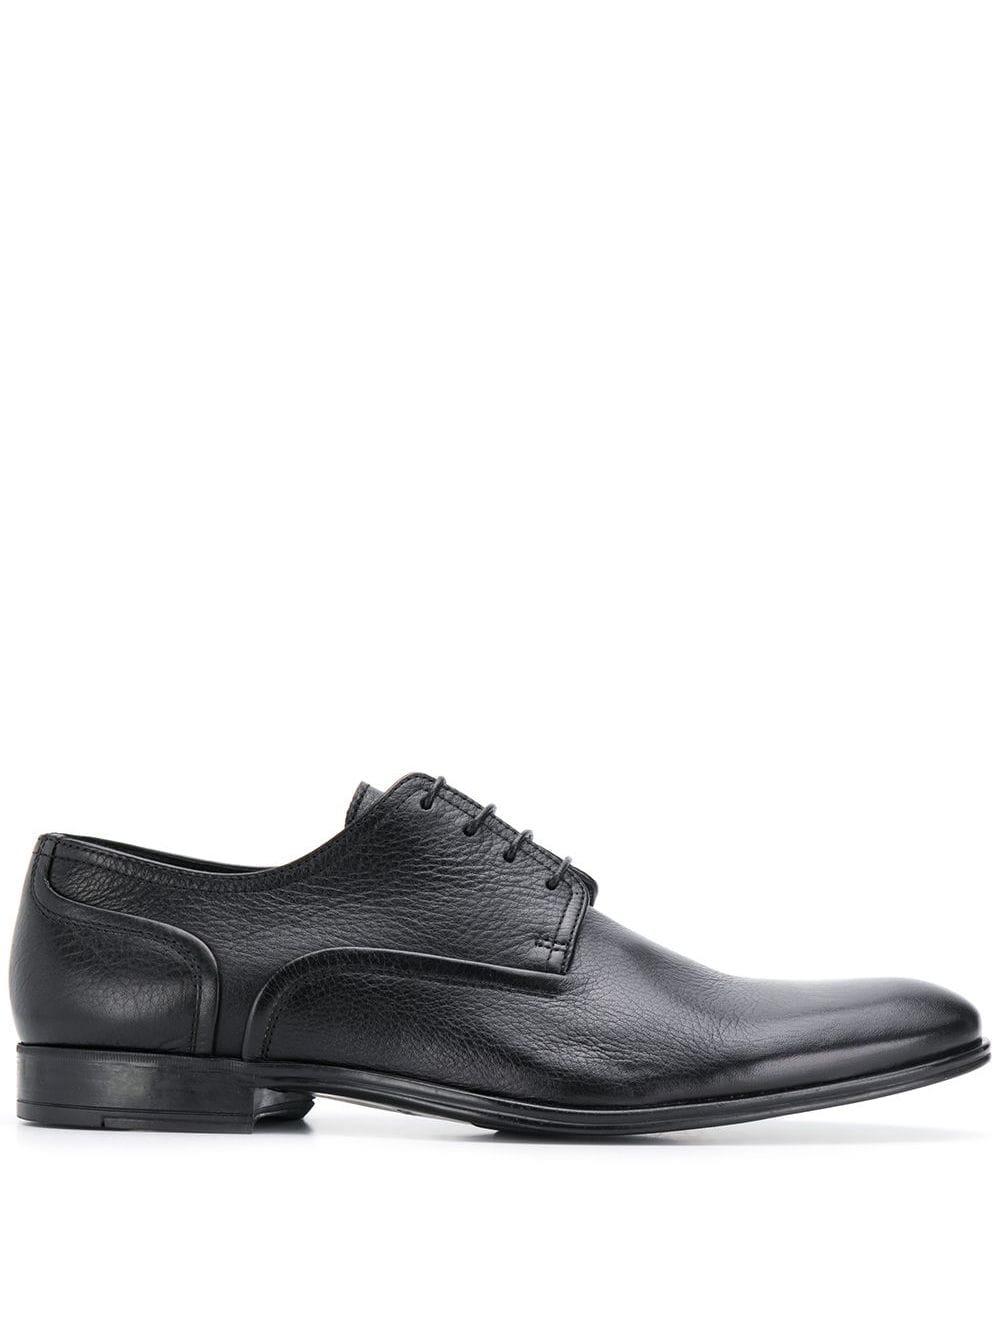 Baldinini Leather Classic Derby Shoes in Black for Men - Lyst